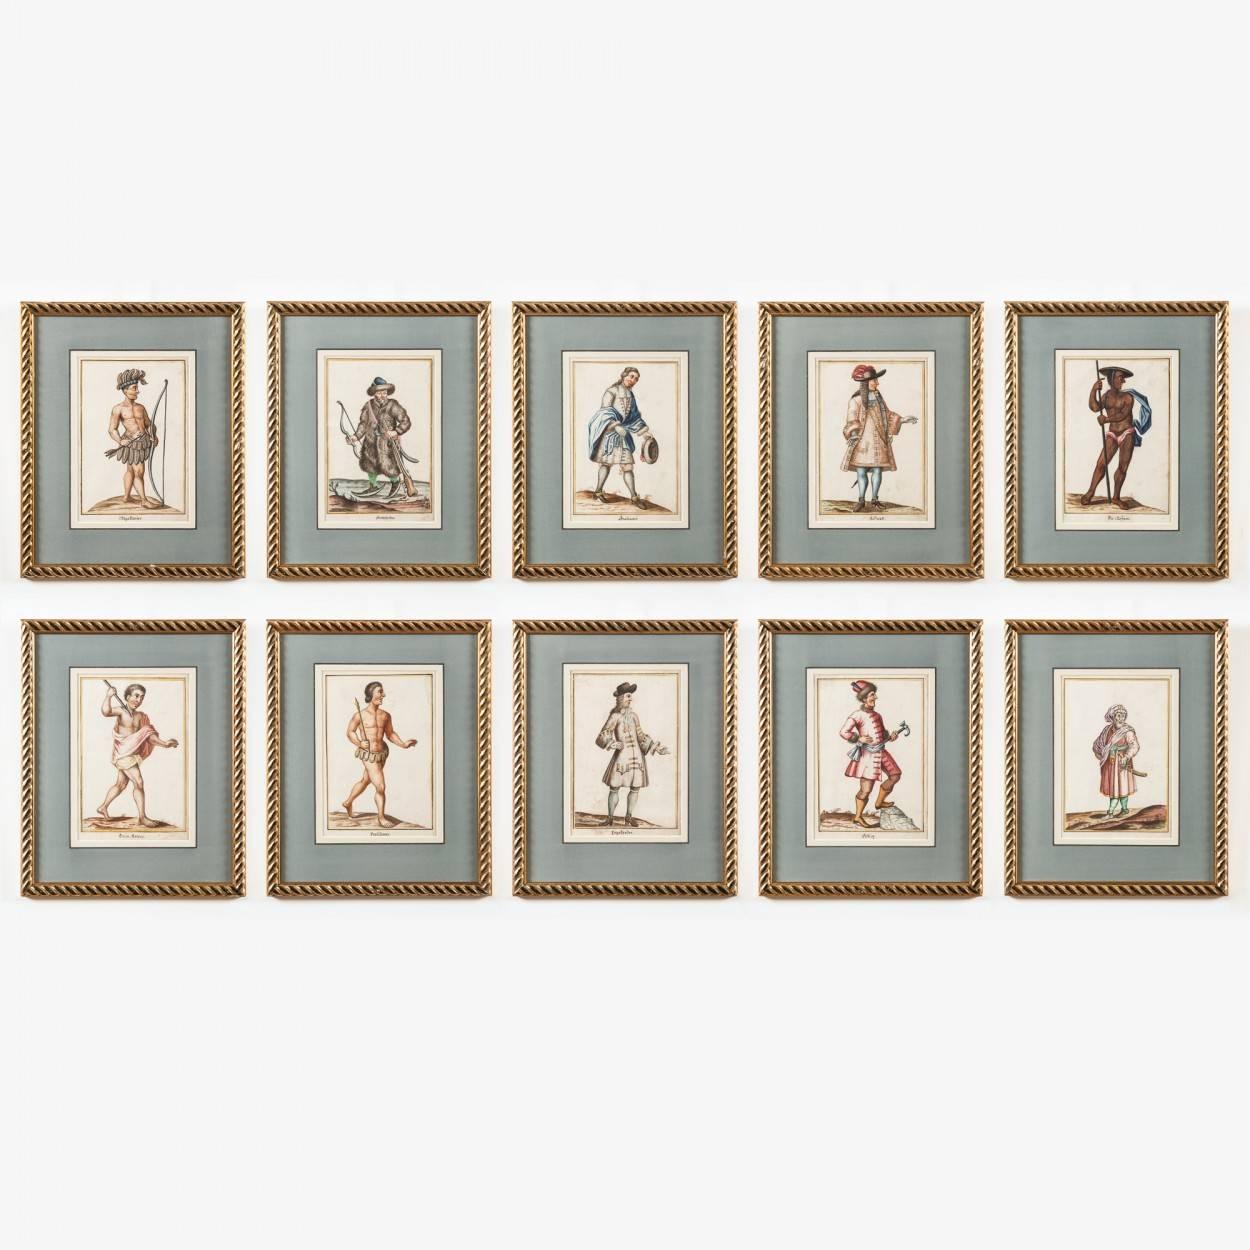 Unknown Figurative Art - Set of 10 18th Century German Watercolours Depicting Figures In National Costume